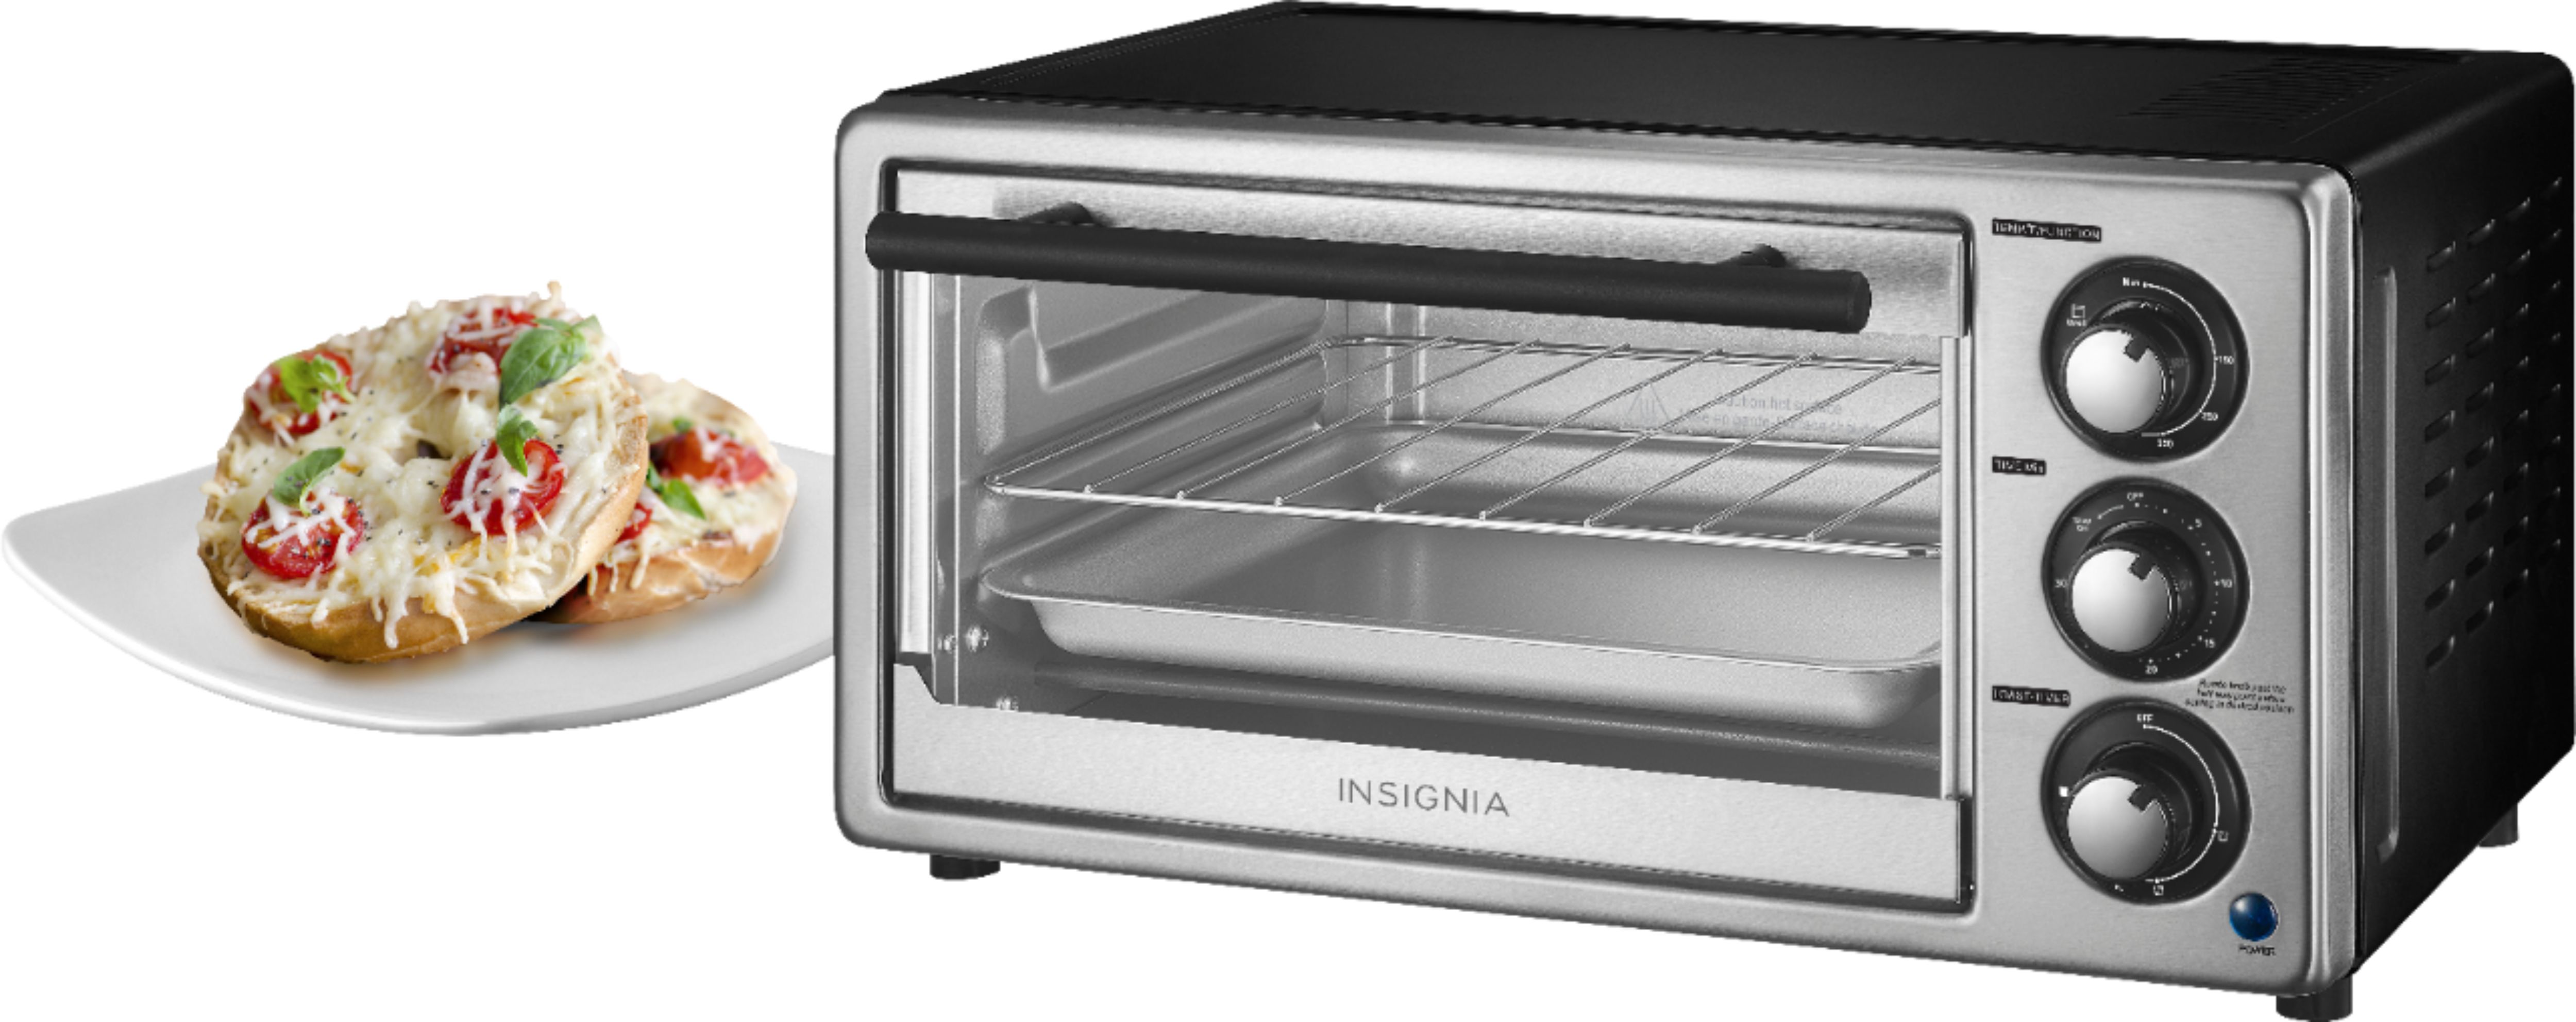 Black+Decker 4-Slice Toaster Oven Stainless Steel TO1760SS - Best Buy